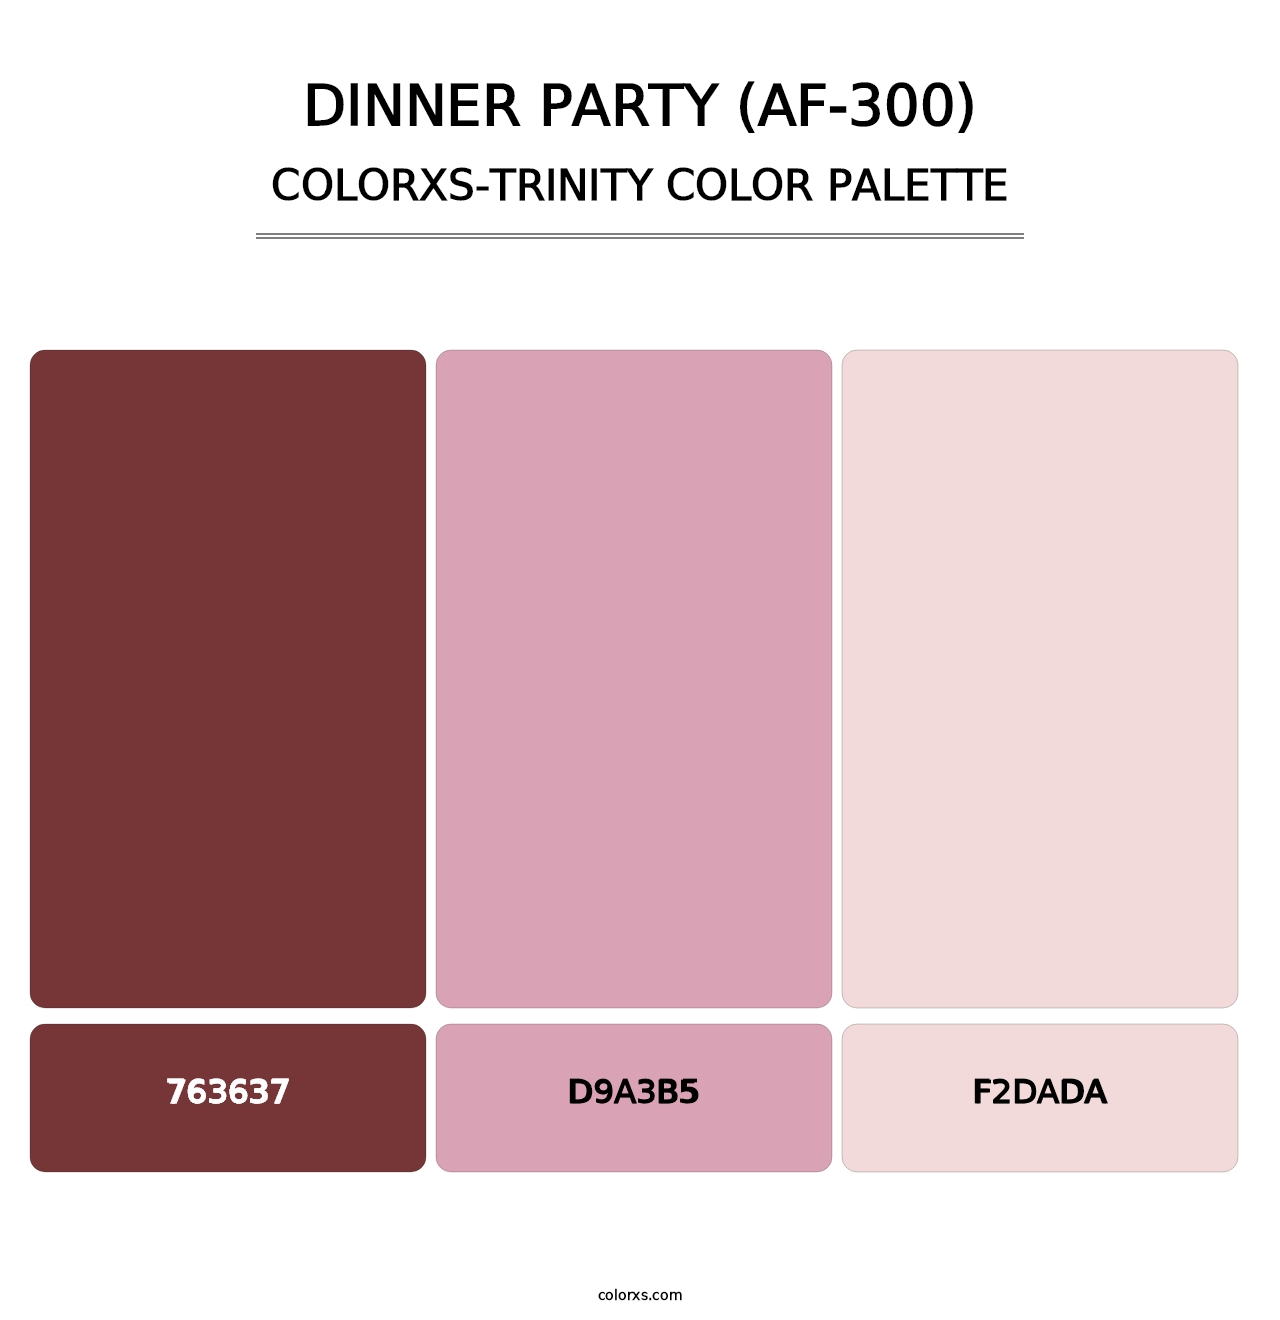 Dinner Party (AF-300) - Colorxs Trinity Palette